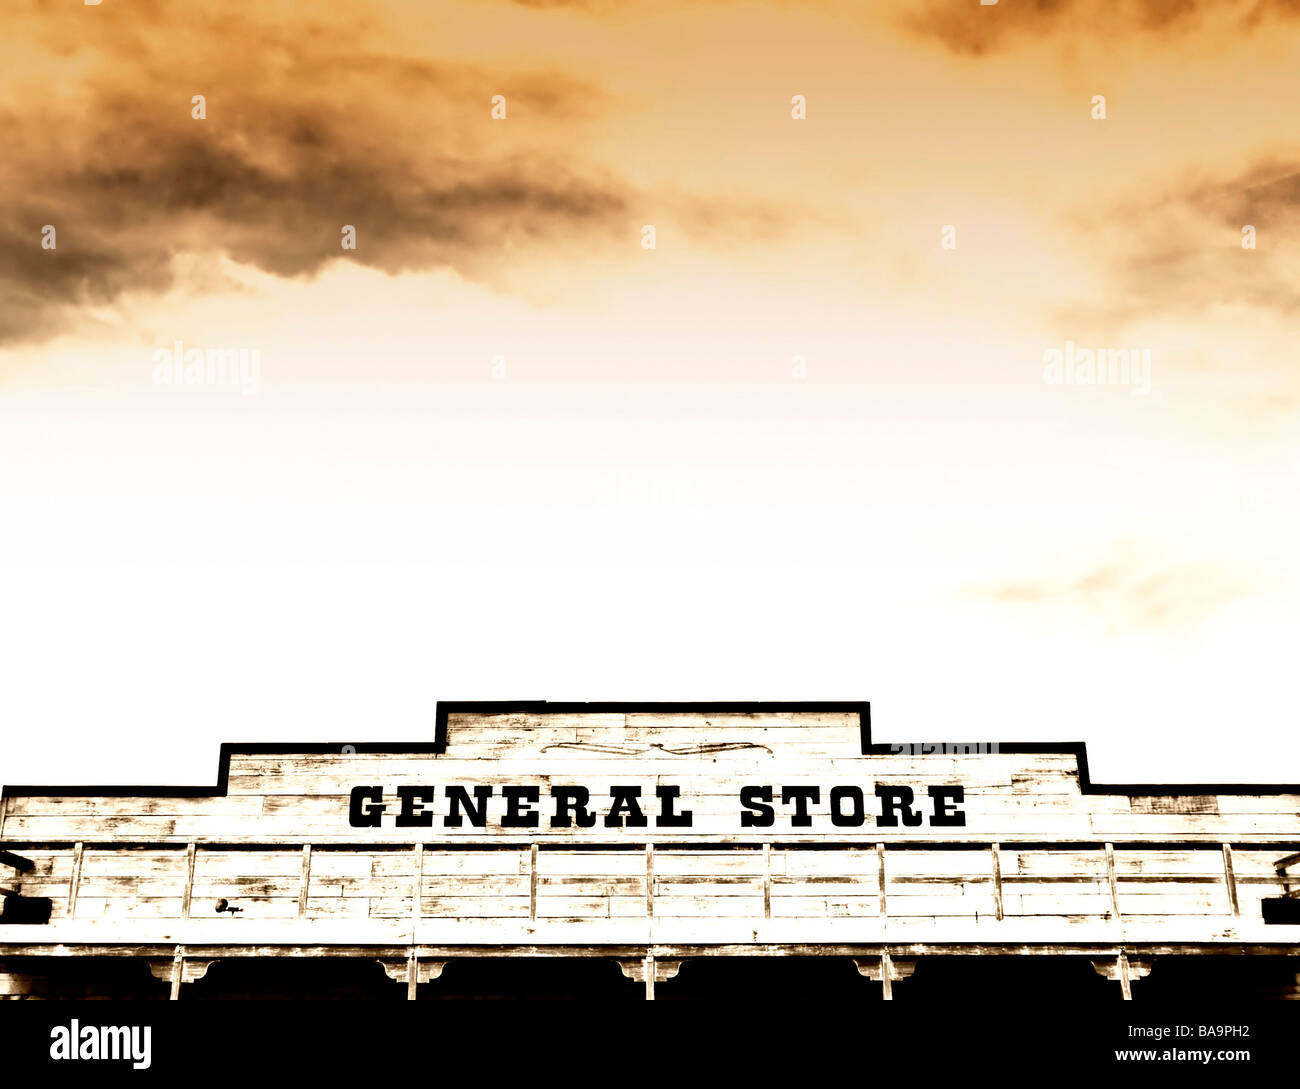 General Store in The Wild West of Arizona Stock Photo